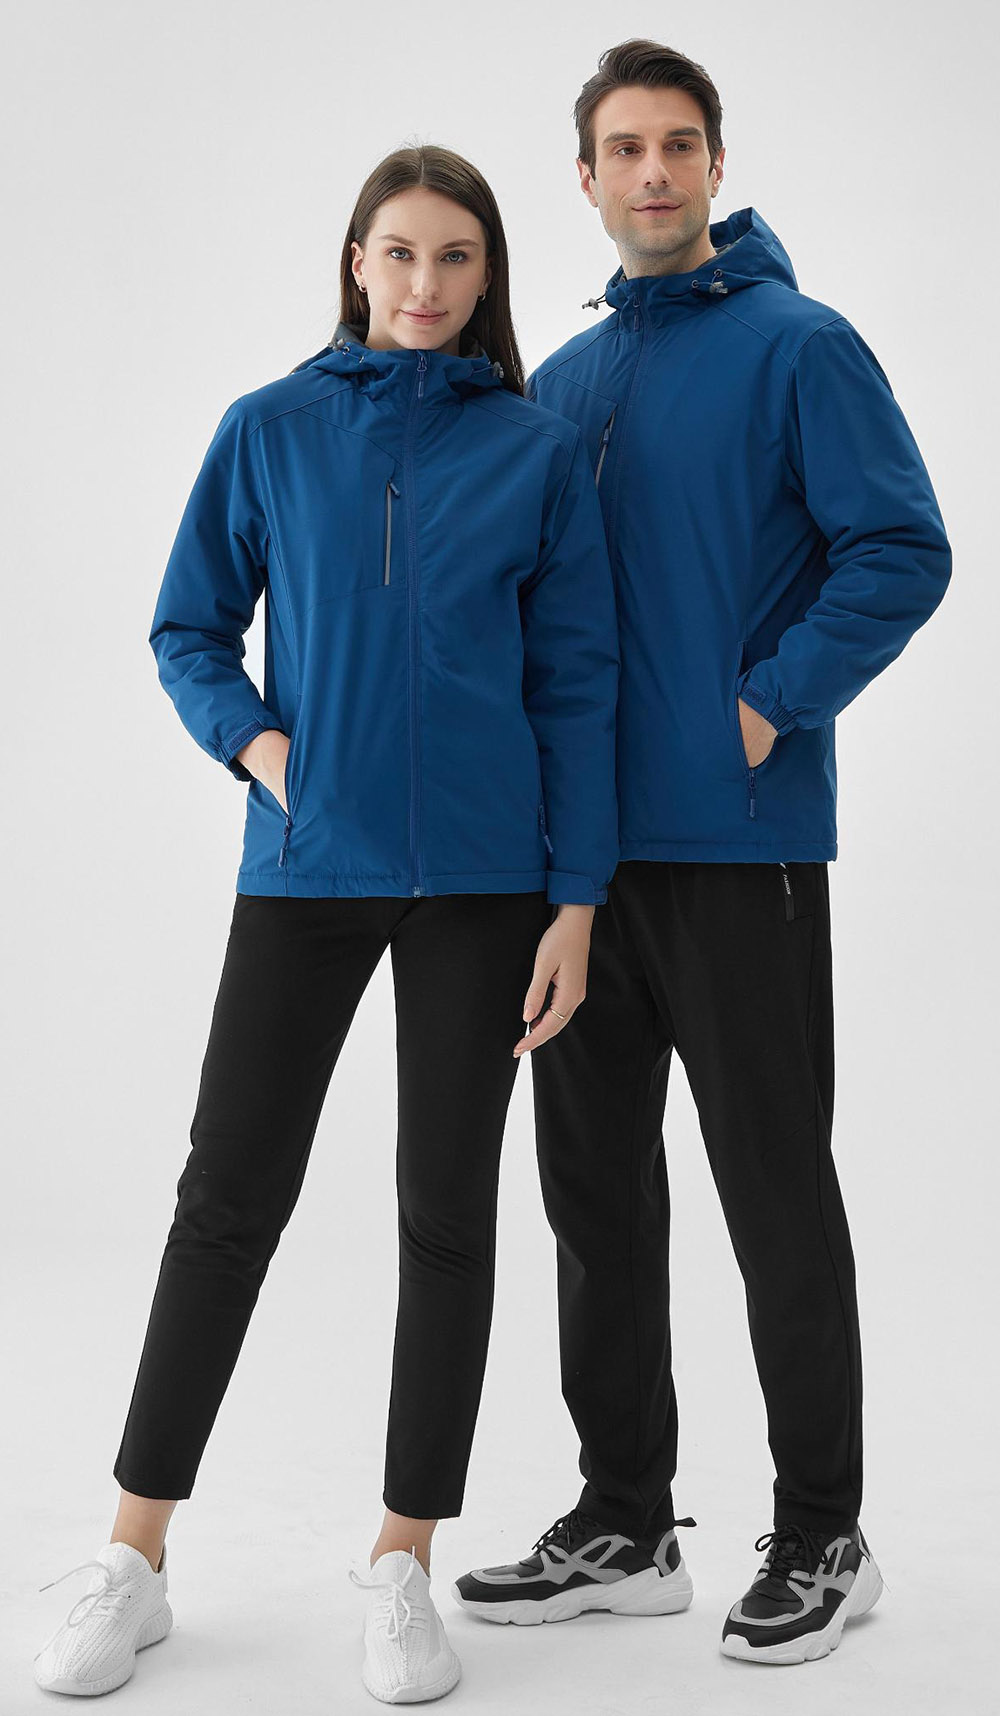 Embracing Winter Rain: The Indispensable Role of Waterproof and Windproof Windbreaker Jackets